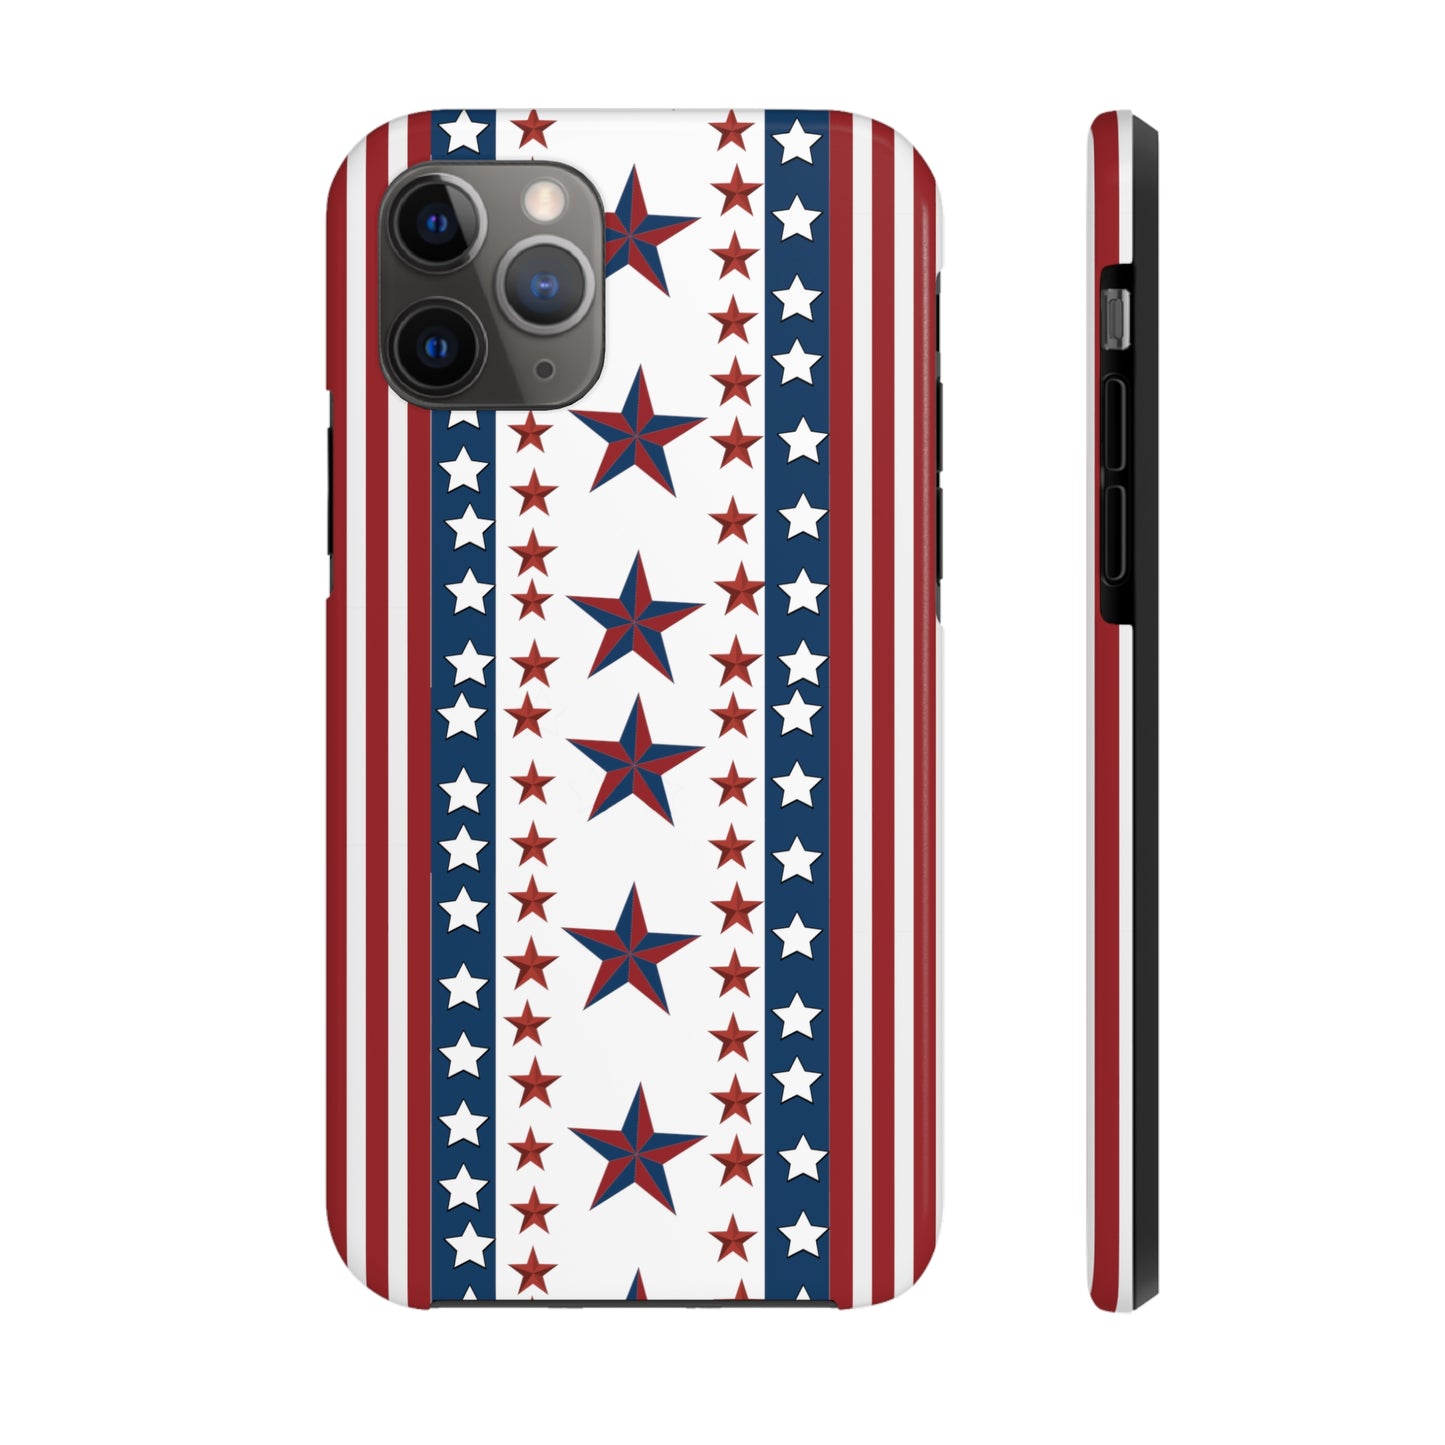 4th of july usa patriotic iphone case with red, white and blue stars and stripes